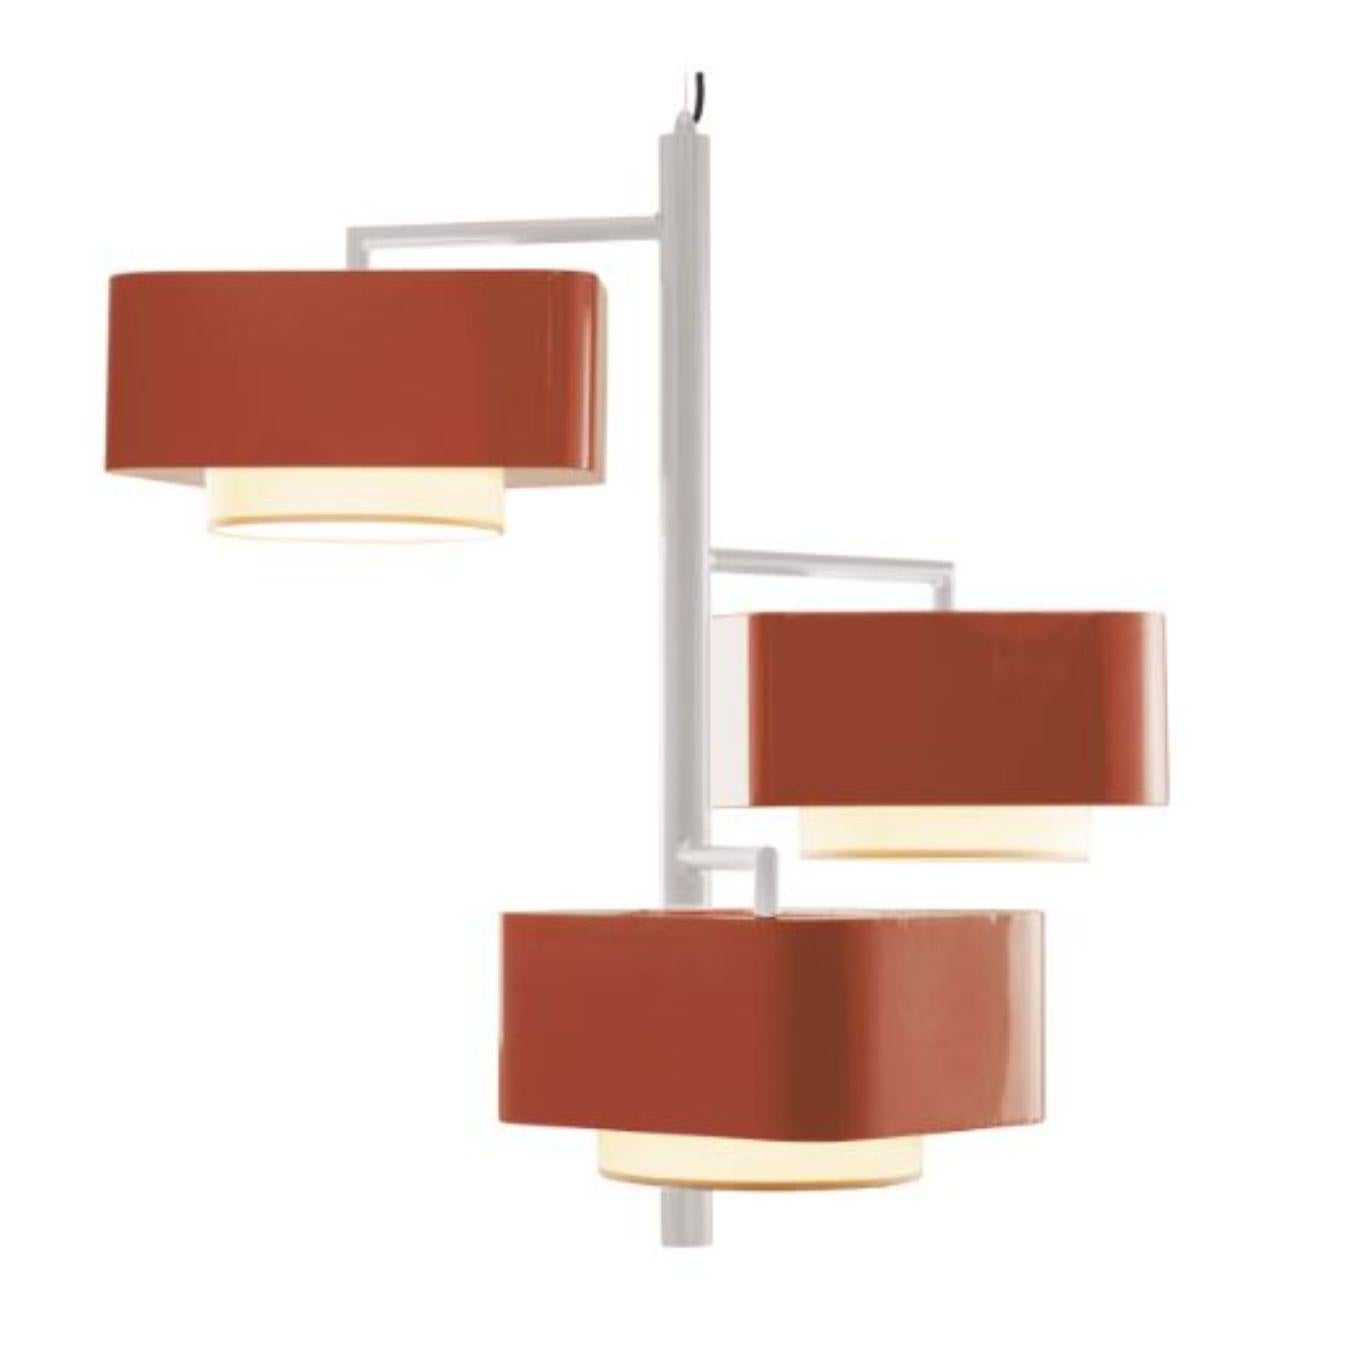 Taupe and copper carousel I suspension lamp by Dooq
Dimensions: W 97 x D 97 x H 86 cm
Materials: lacquered metal.
abat-jour: cotton
Also available in different colors.

Information:
230V/50Hz
E27/3x20W LED
120V/60Hz
E26/3x15W LED
bulbs